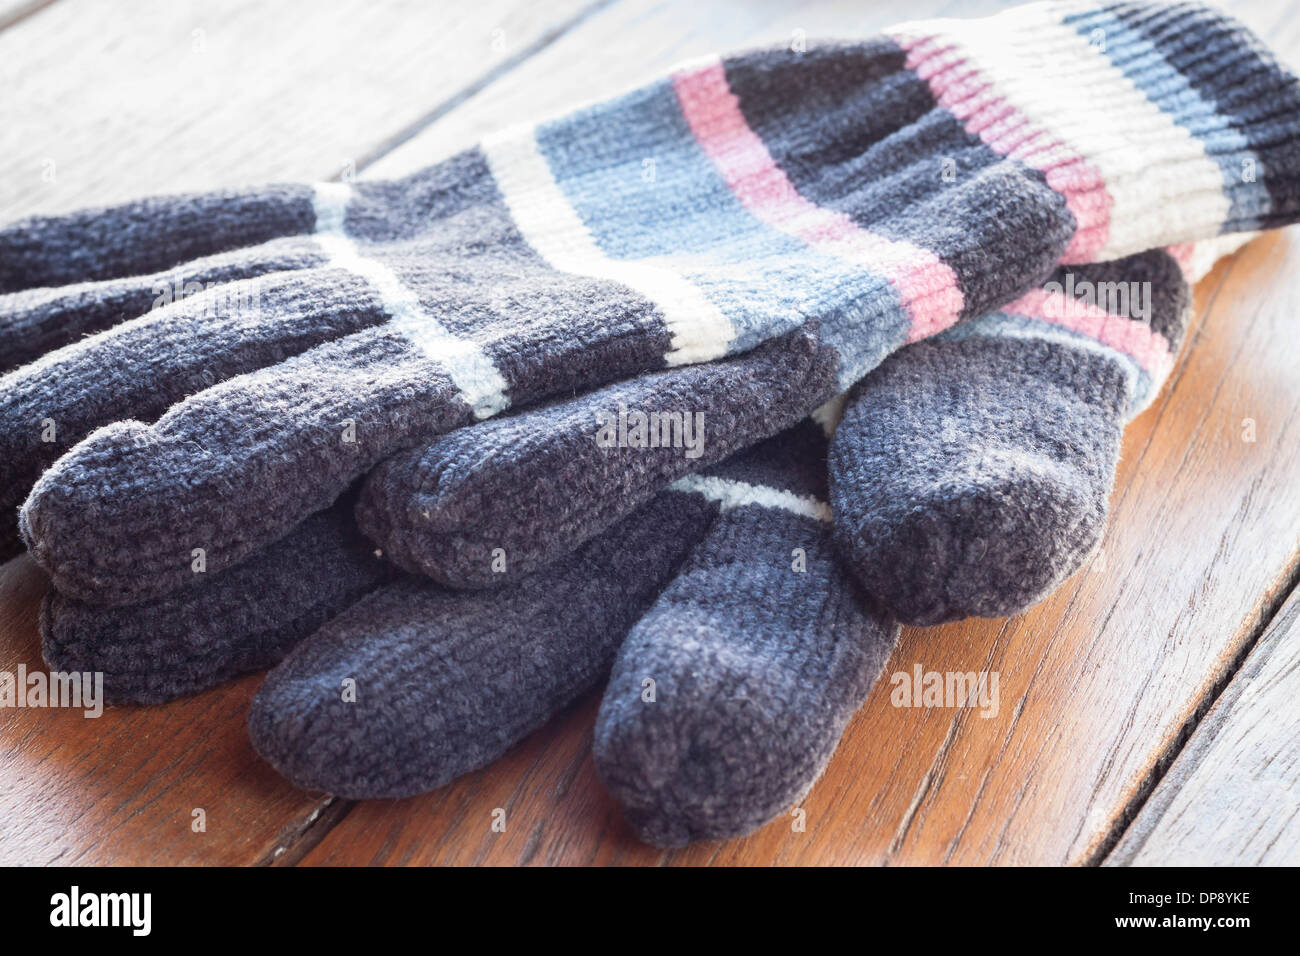 Knit wool gloves on wood table, stock photo Stock Photo